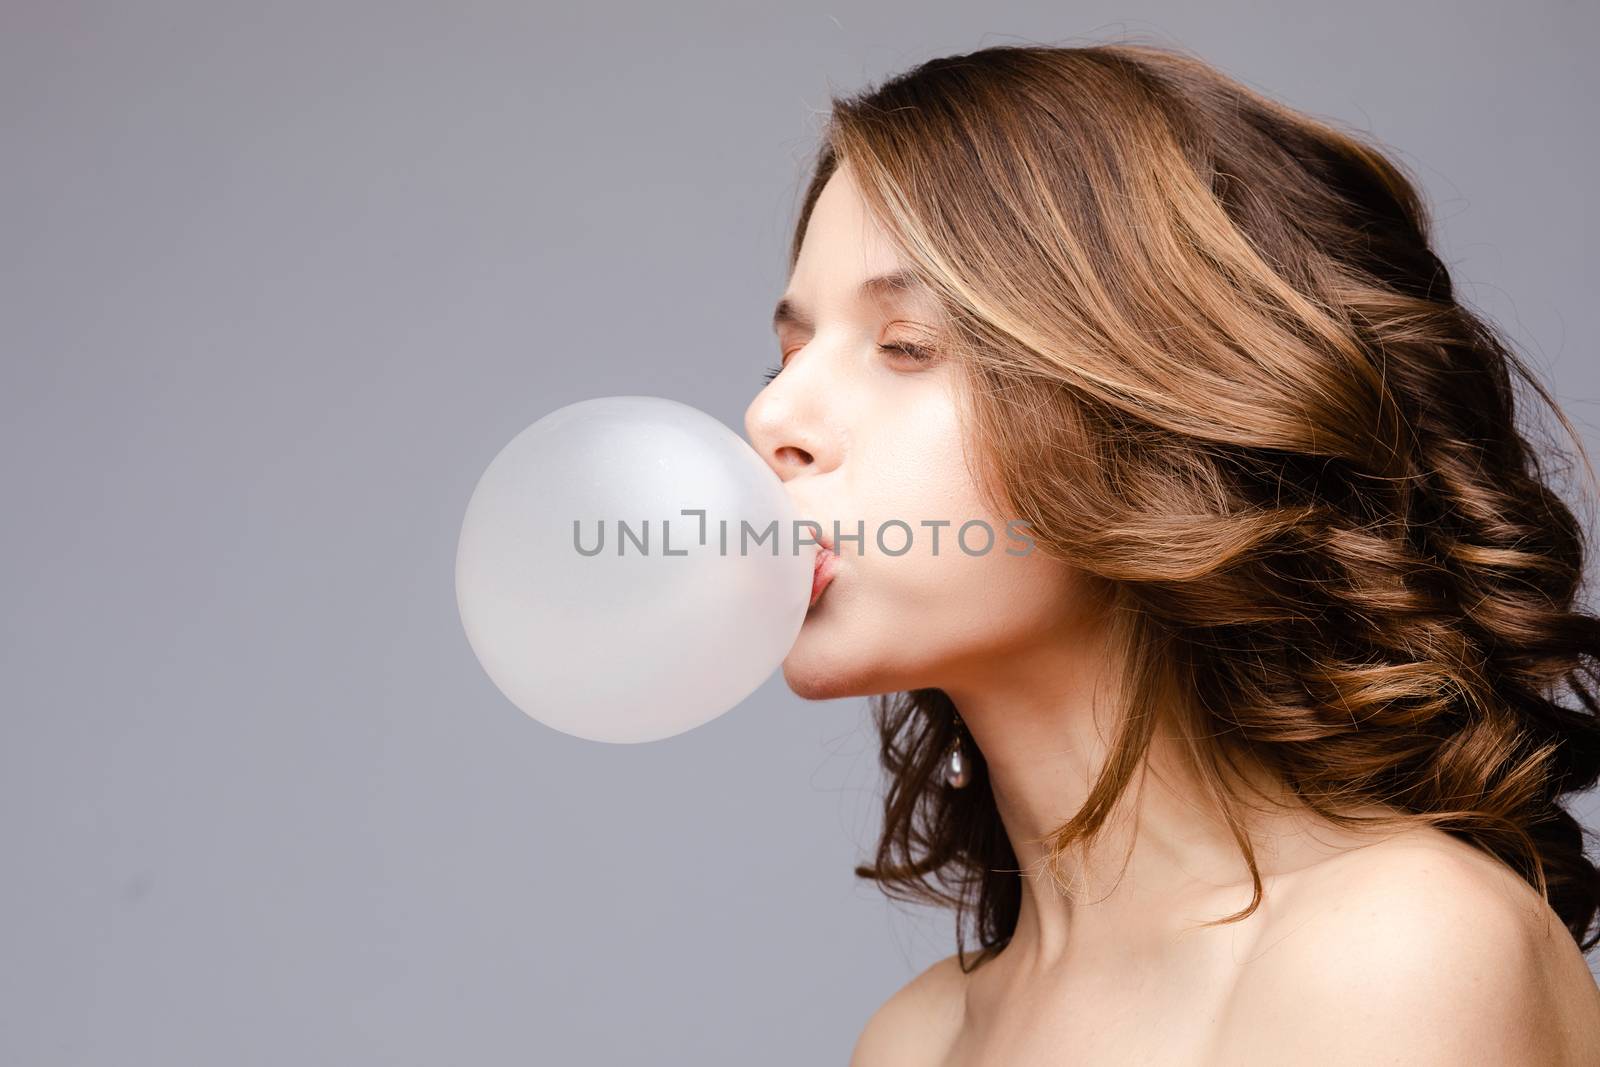 Charming young girl blowing bubble from chewing gum